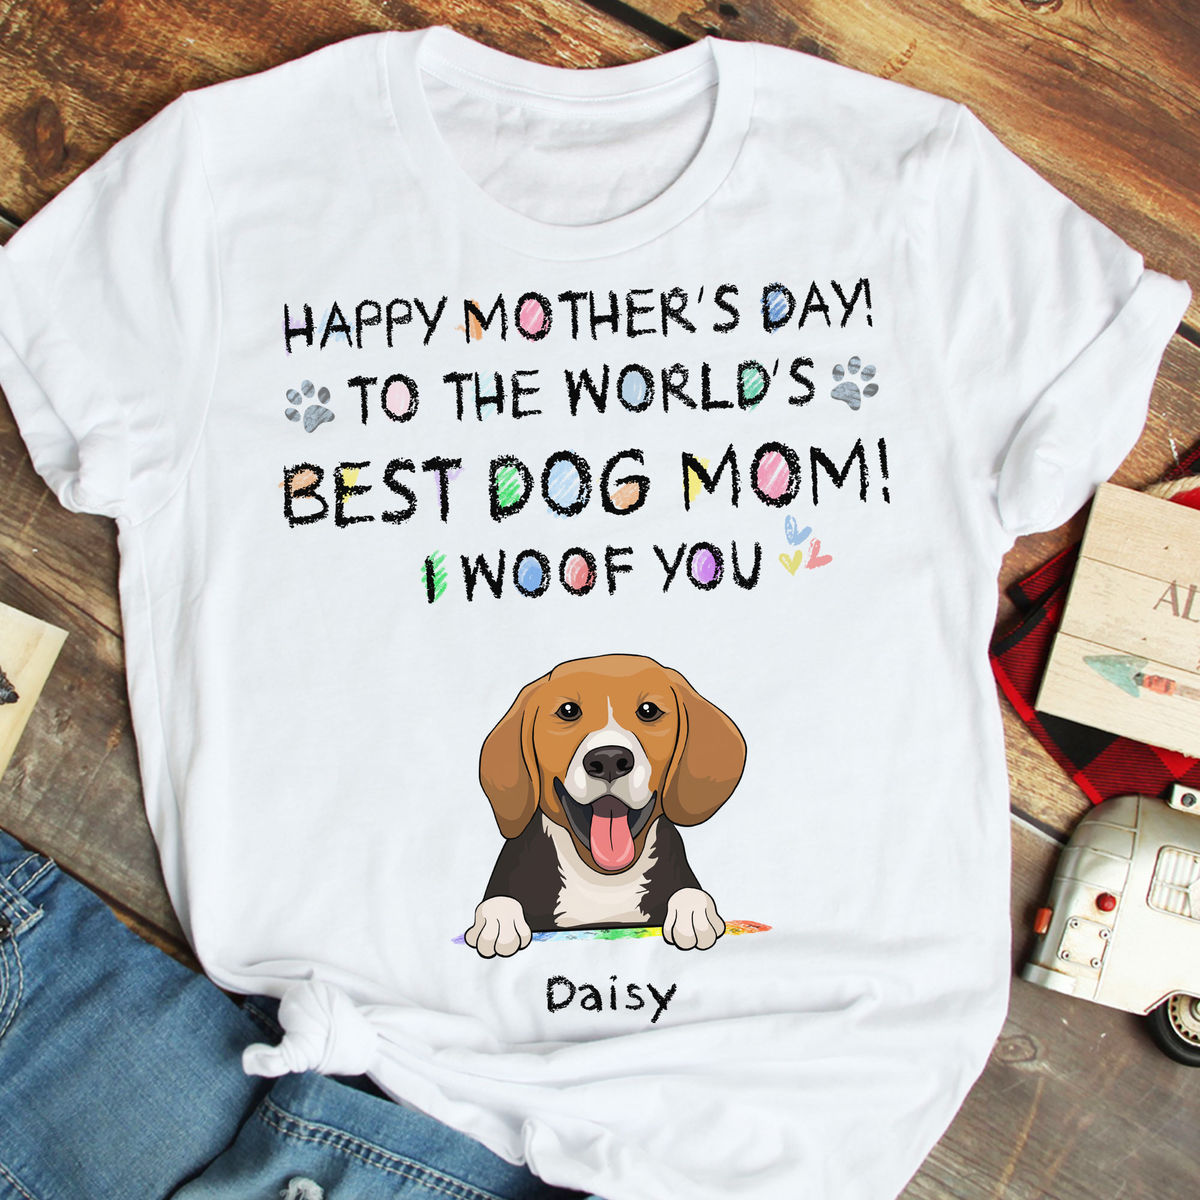 Happy Mother's Day to the world's Best Dog Mom - We Woof You - Mother's Day Gifts, Gifts For Mother